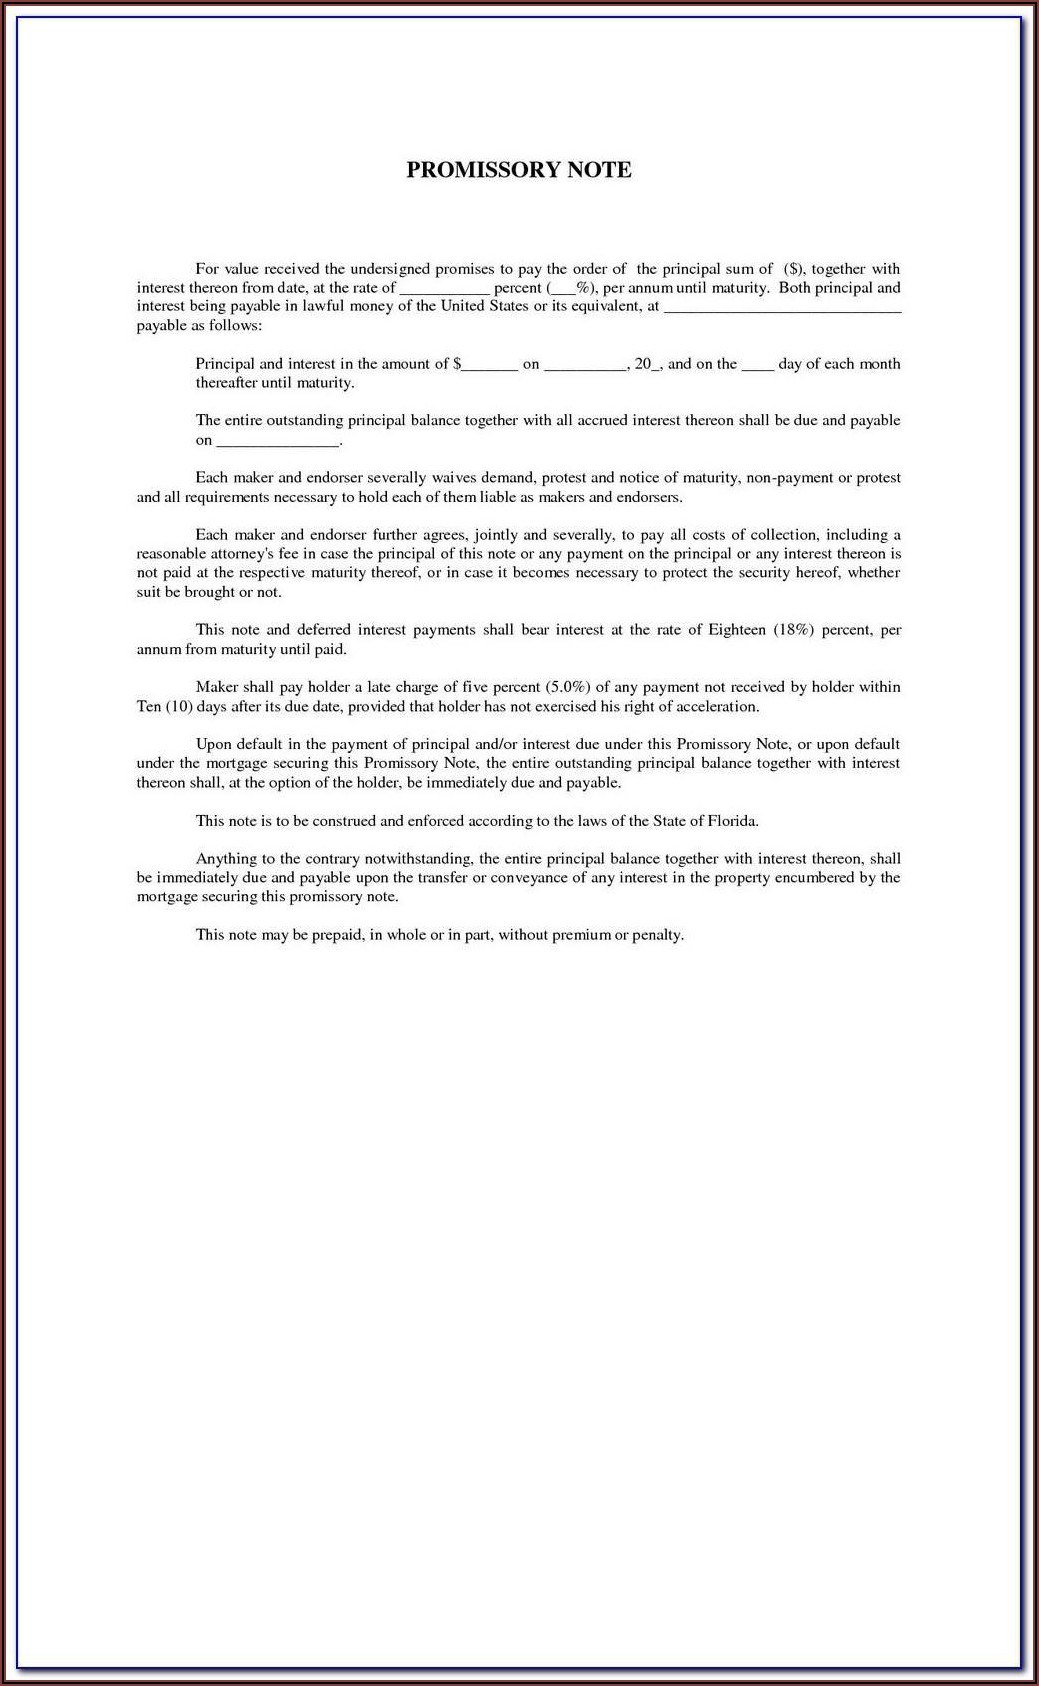 Texas State Bar Promissory Note Form